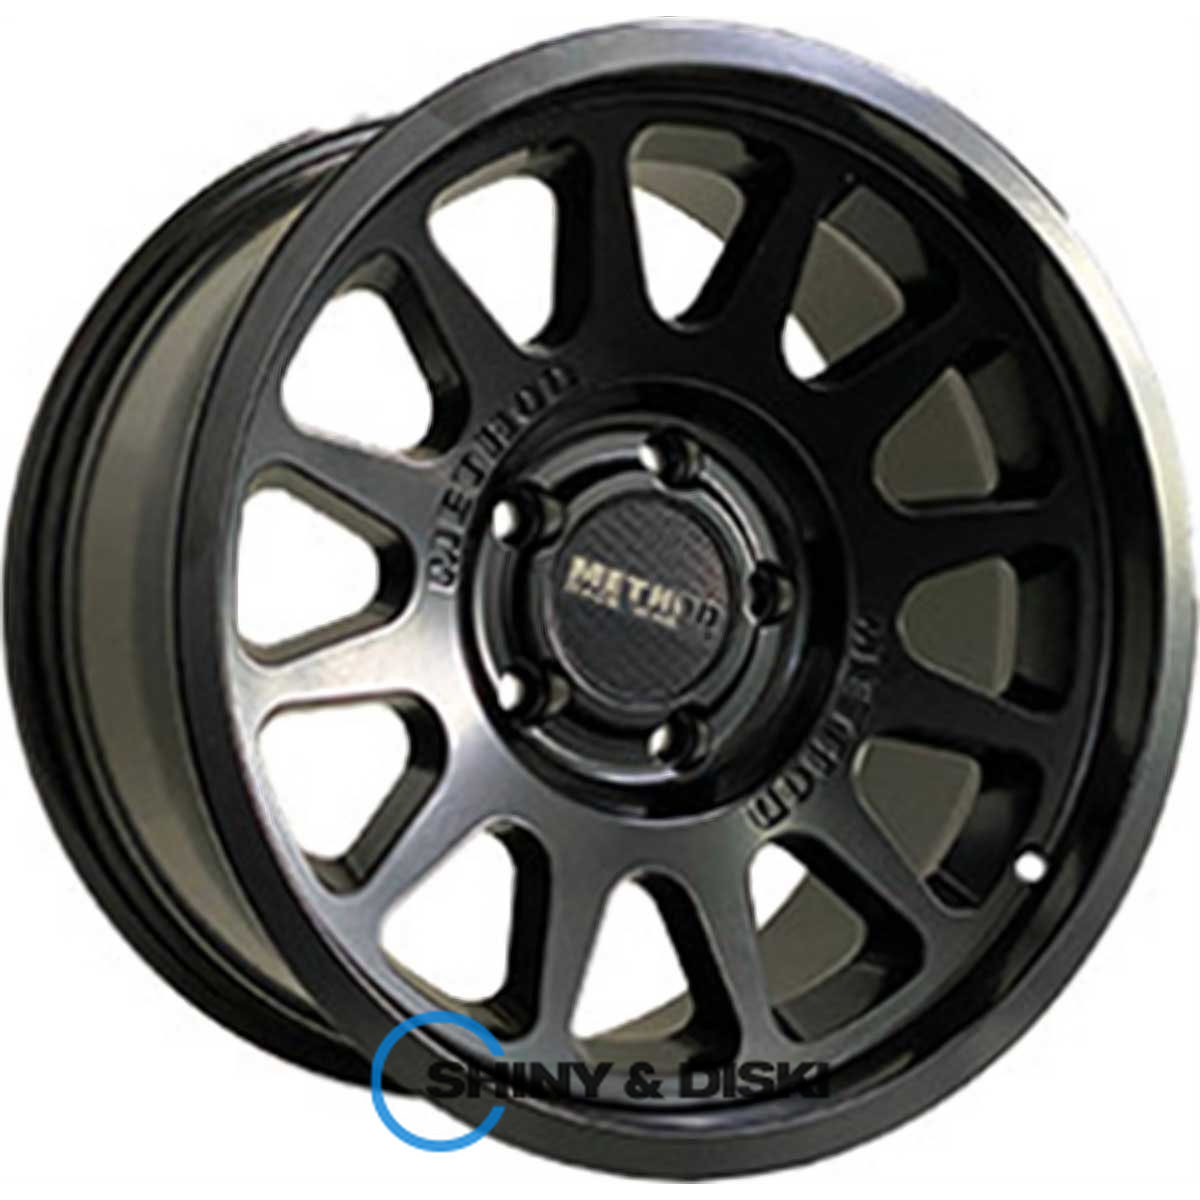 off road wheels ow703 mb